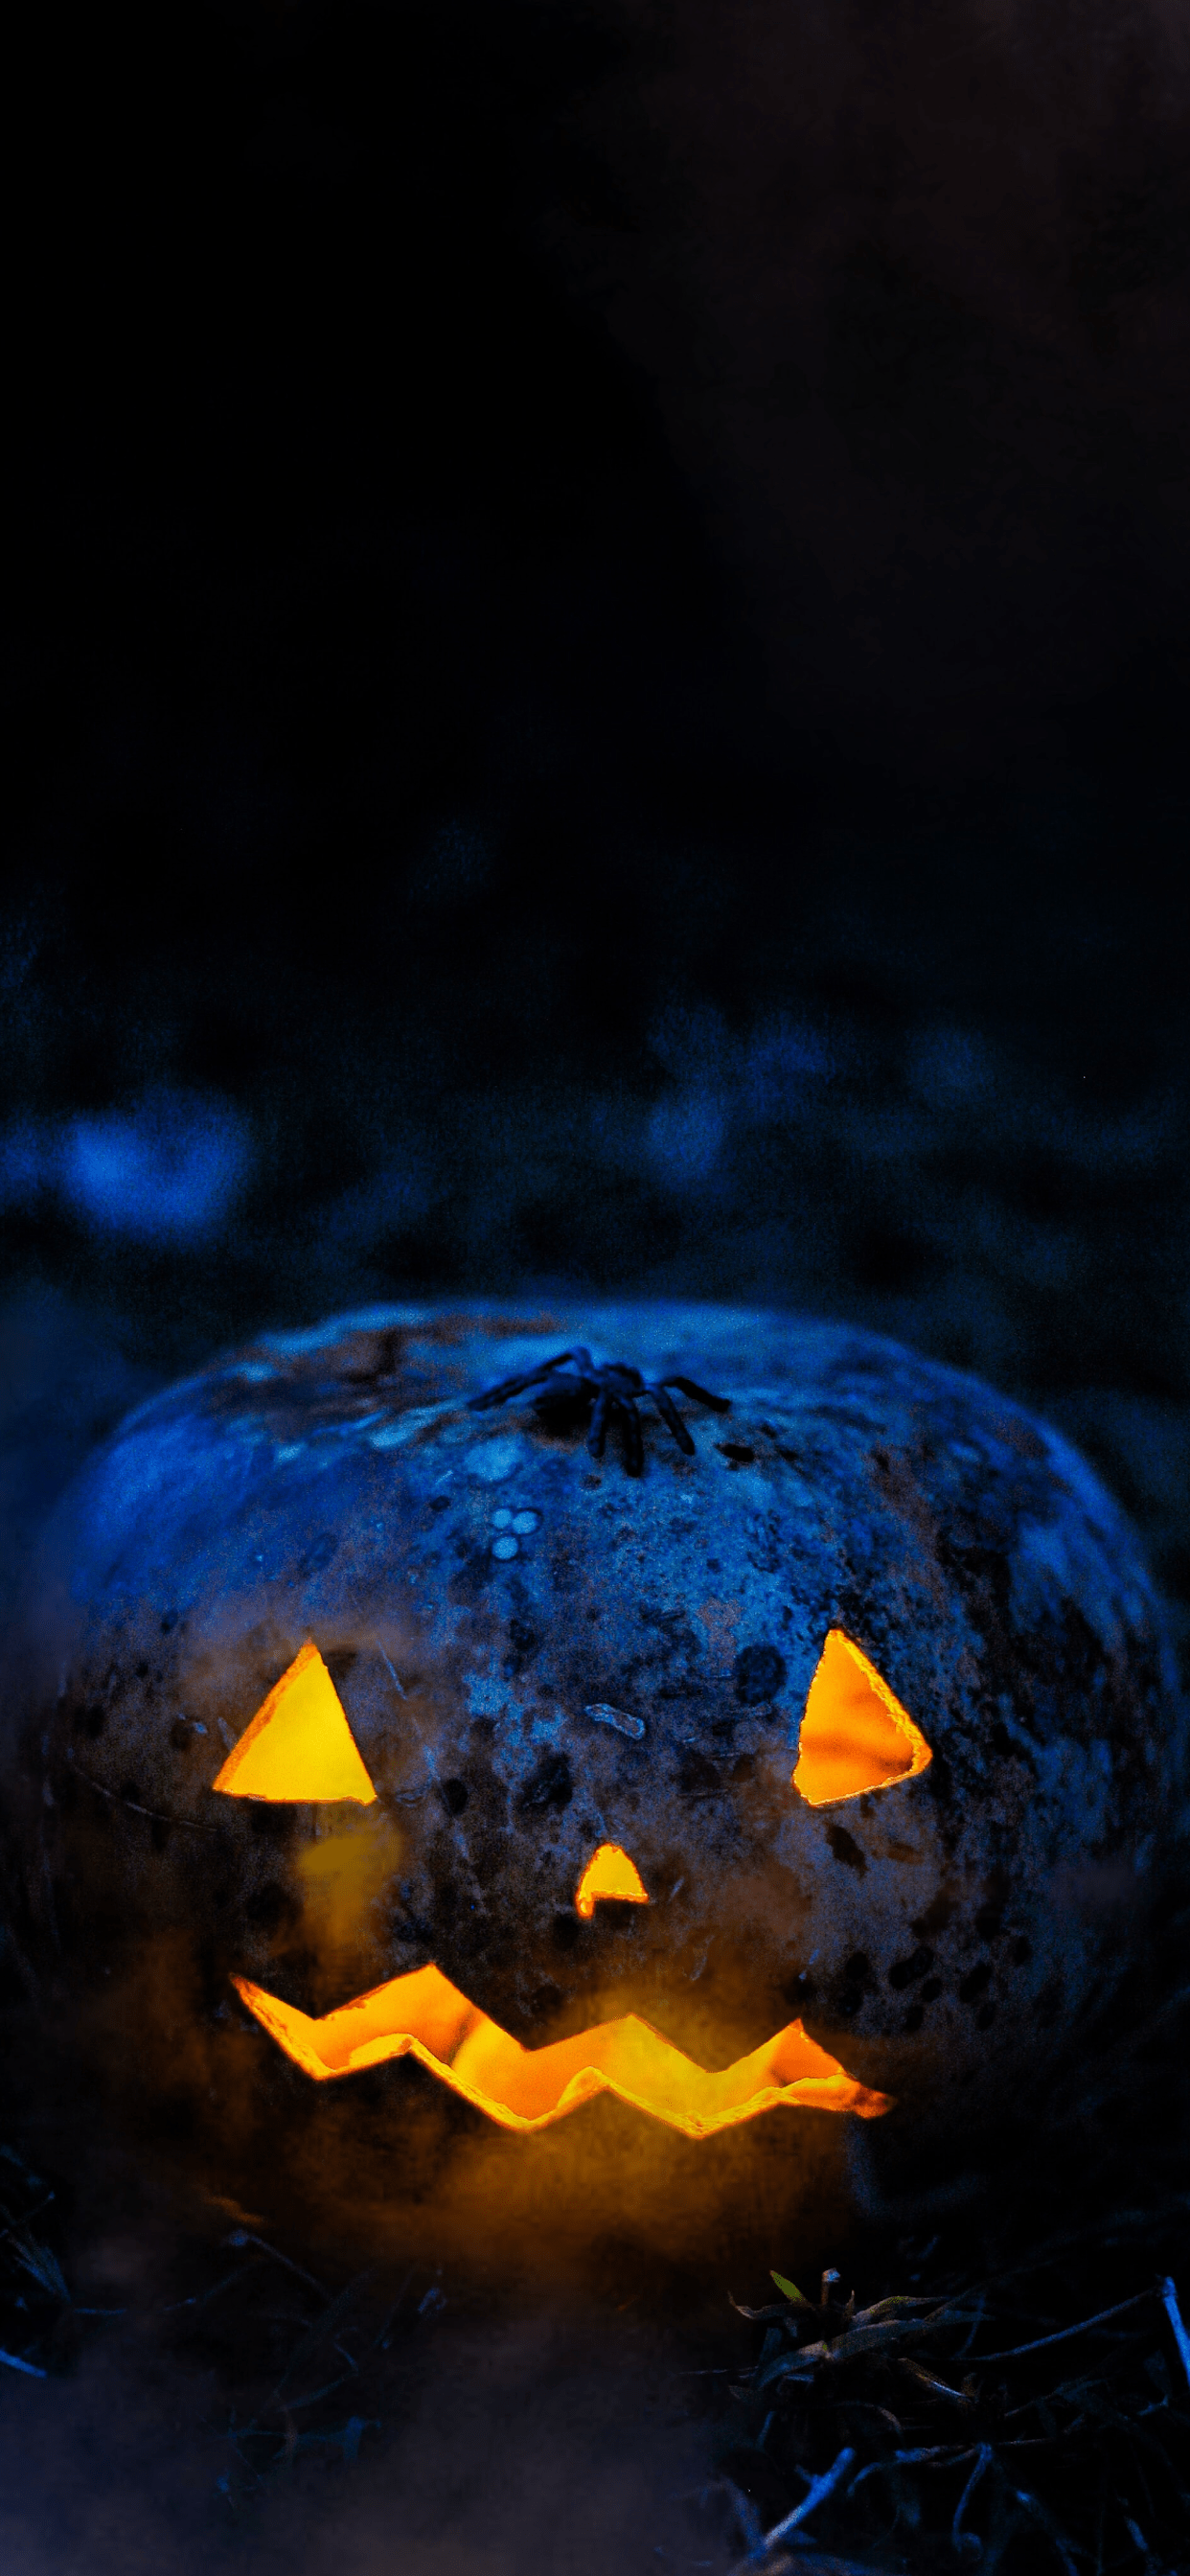 Halloween Wallpaper for iPhone Pro Max, X, 6